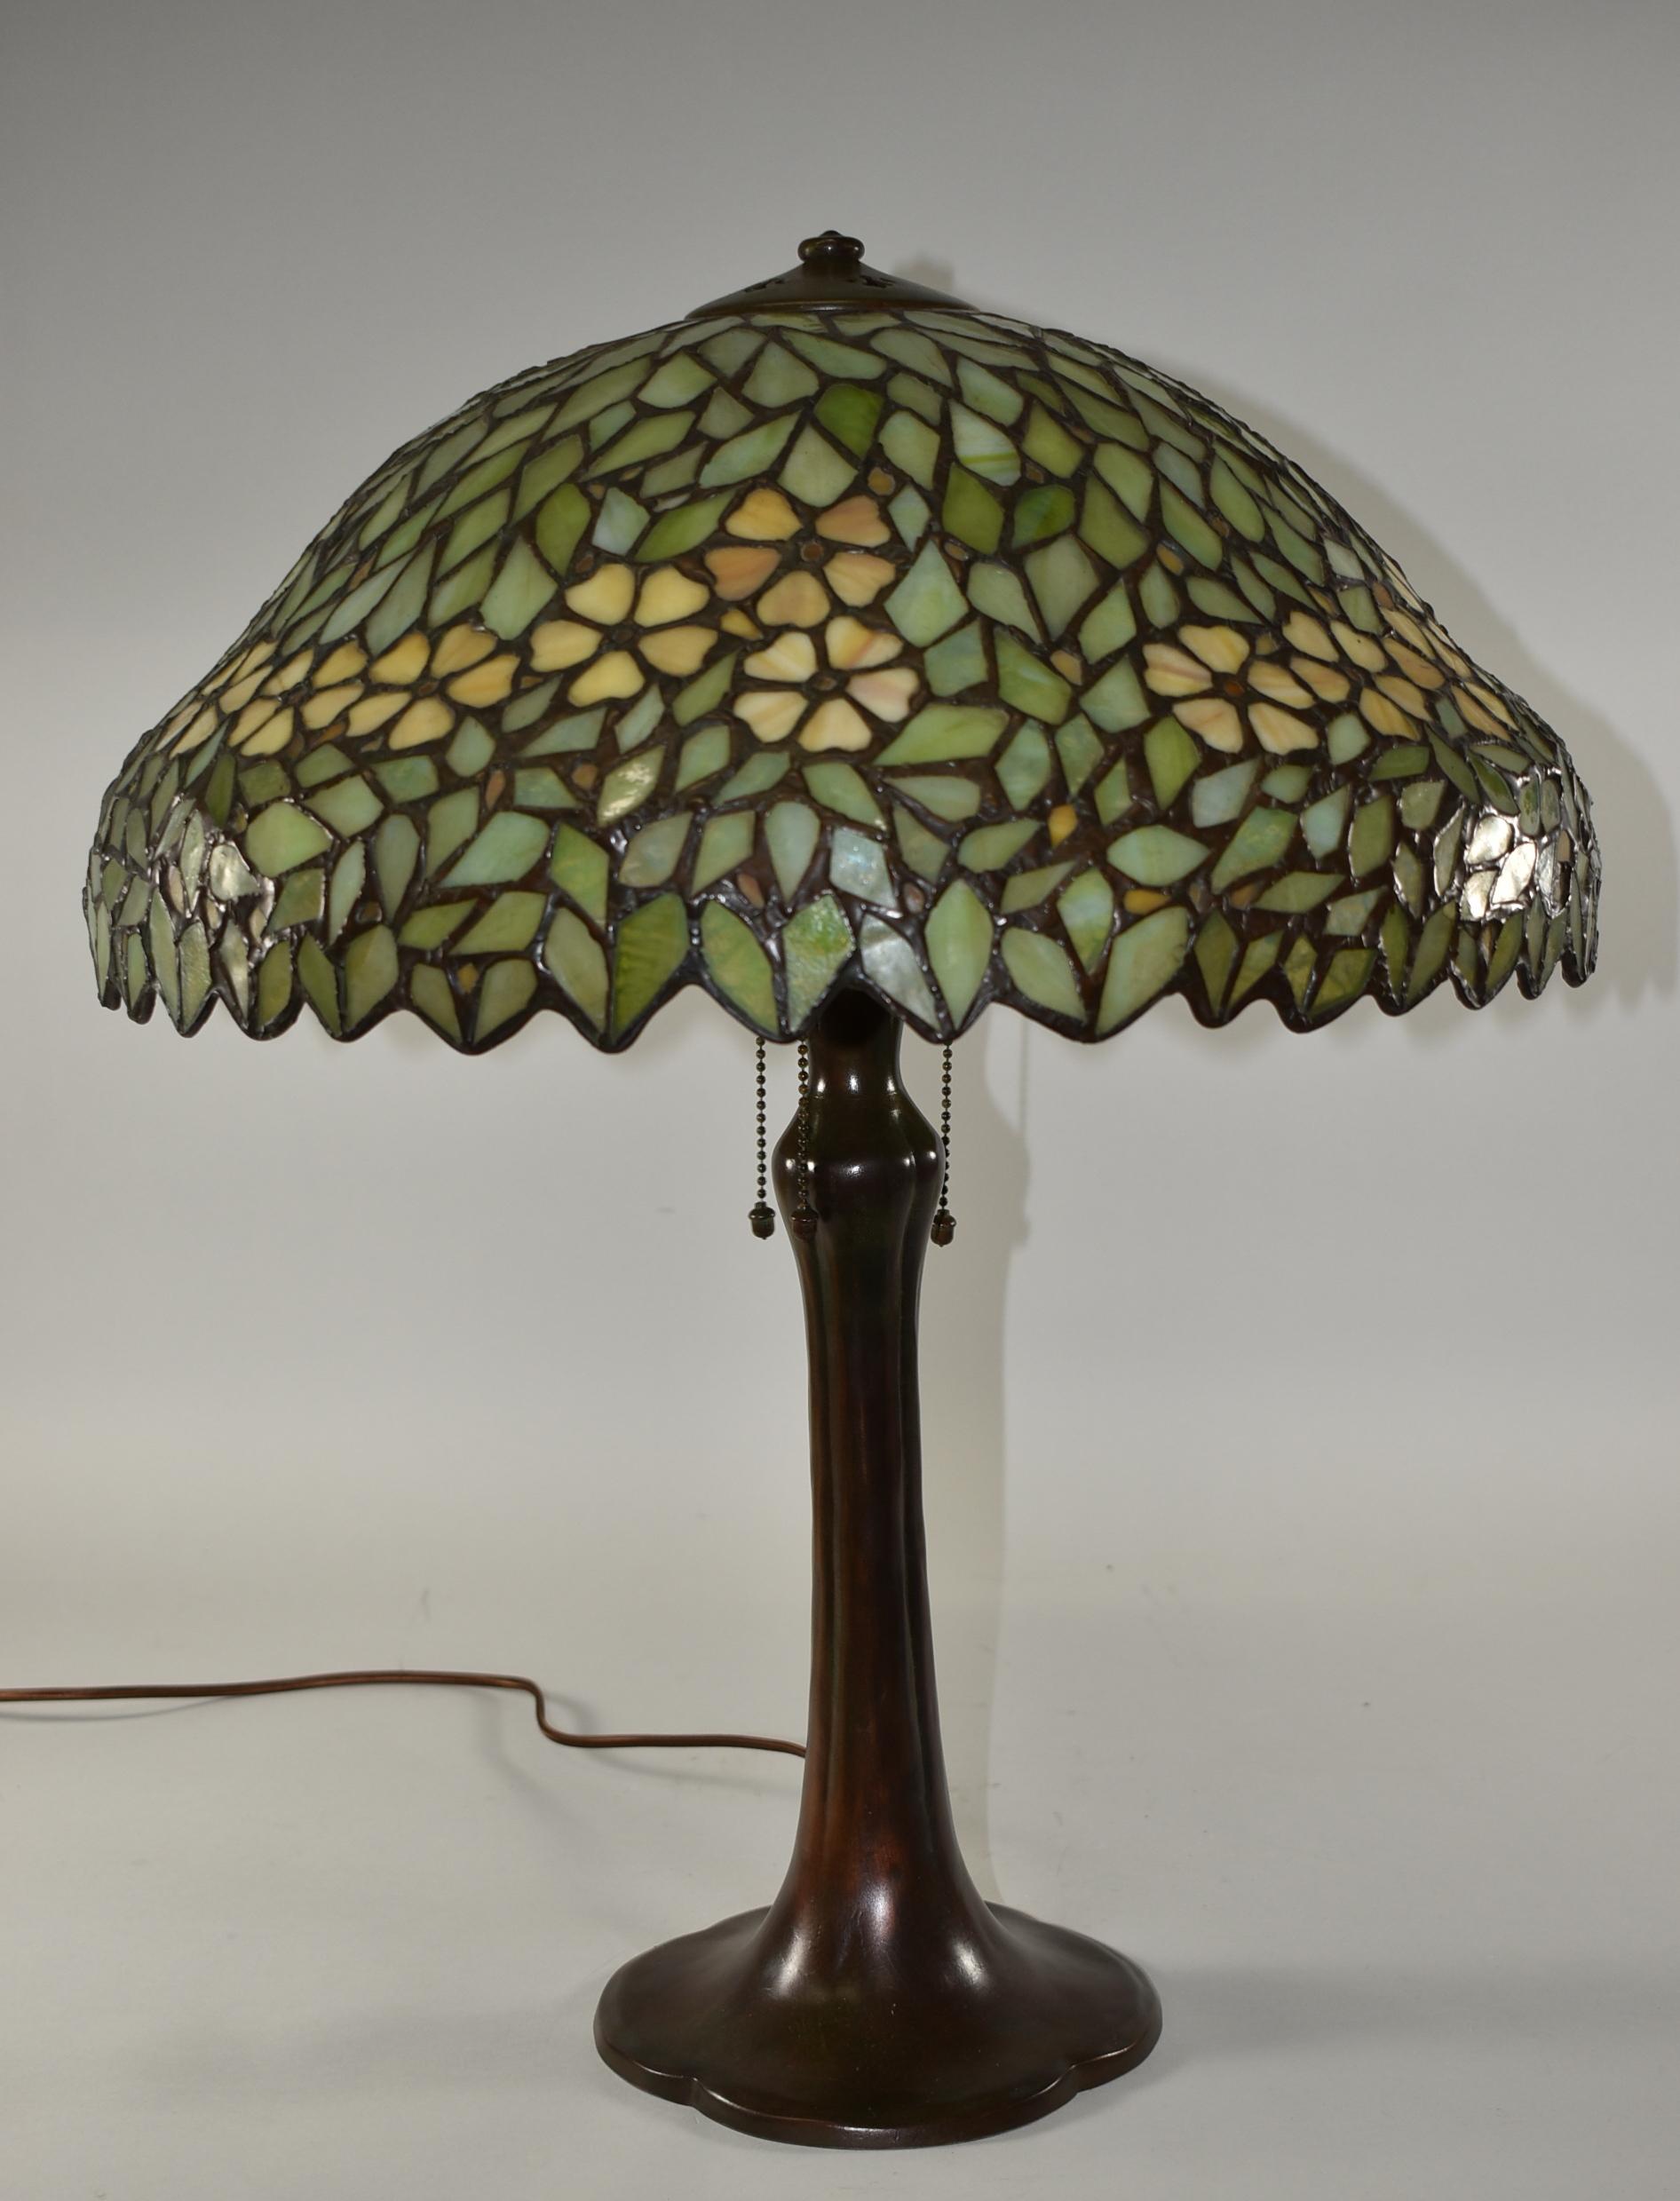 Antique Handel Arts & Crafts leaded table lamp with three Hubbell sockets acorn pull chains. Shade is 18